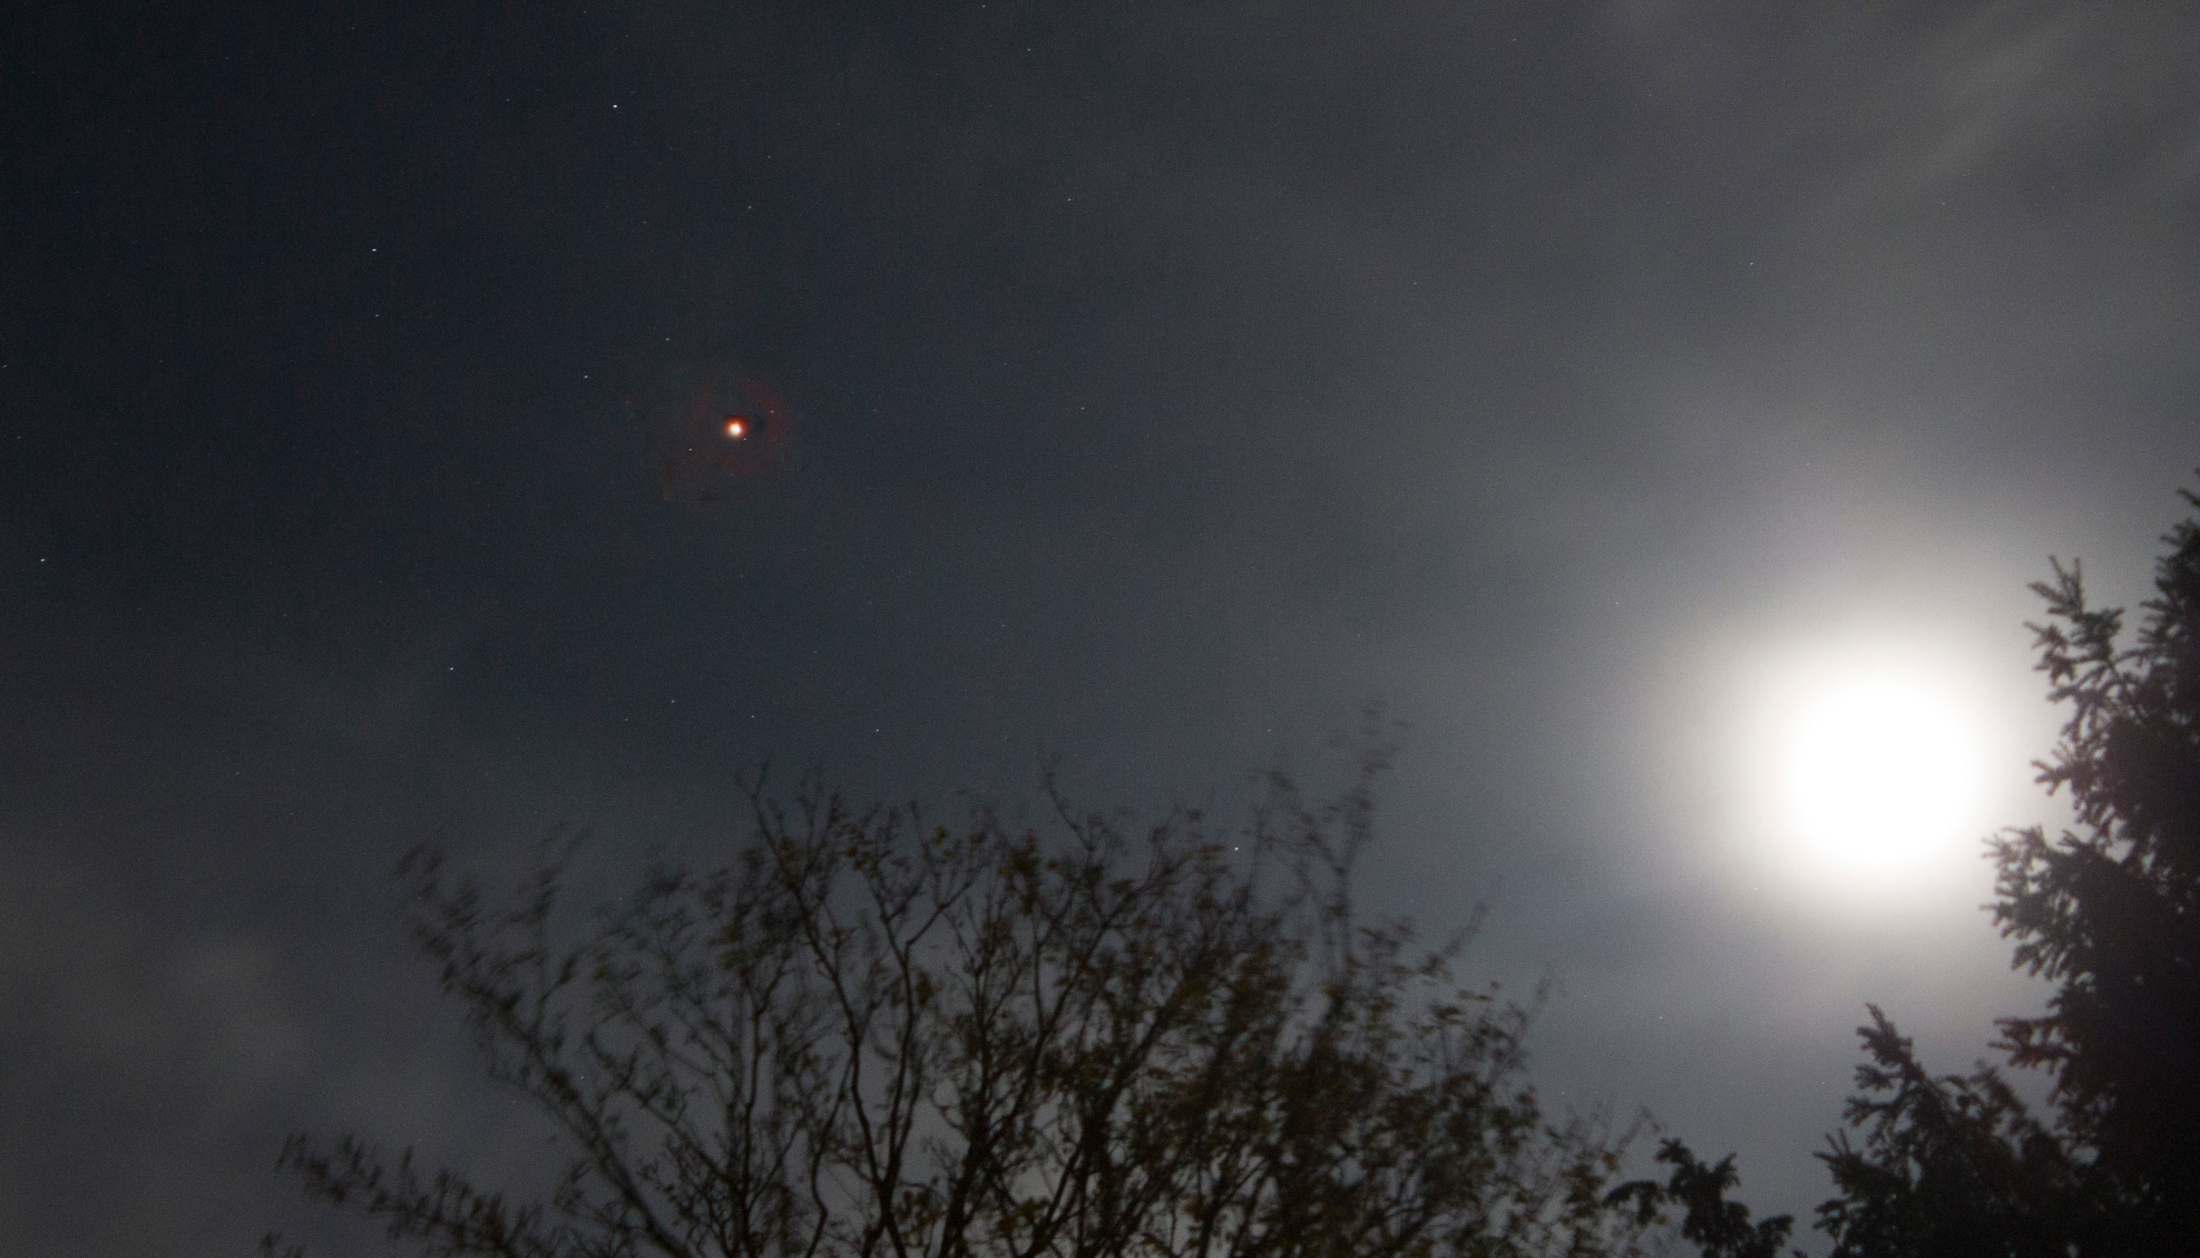 Canon 1100 with kit zoom lens at 55mm. Composite of Mars taken without moon in shot at 2.5 secs, iso 800, f5 and wide shot at iso 400, 1/1250, f5. Credit: James Robertson. Click to enlarge.